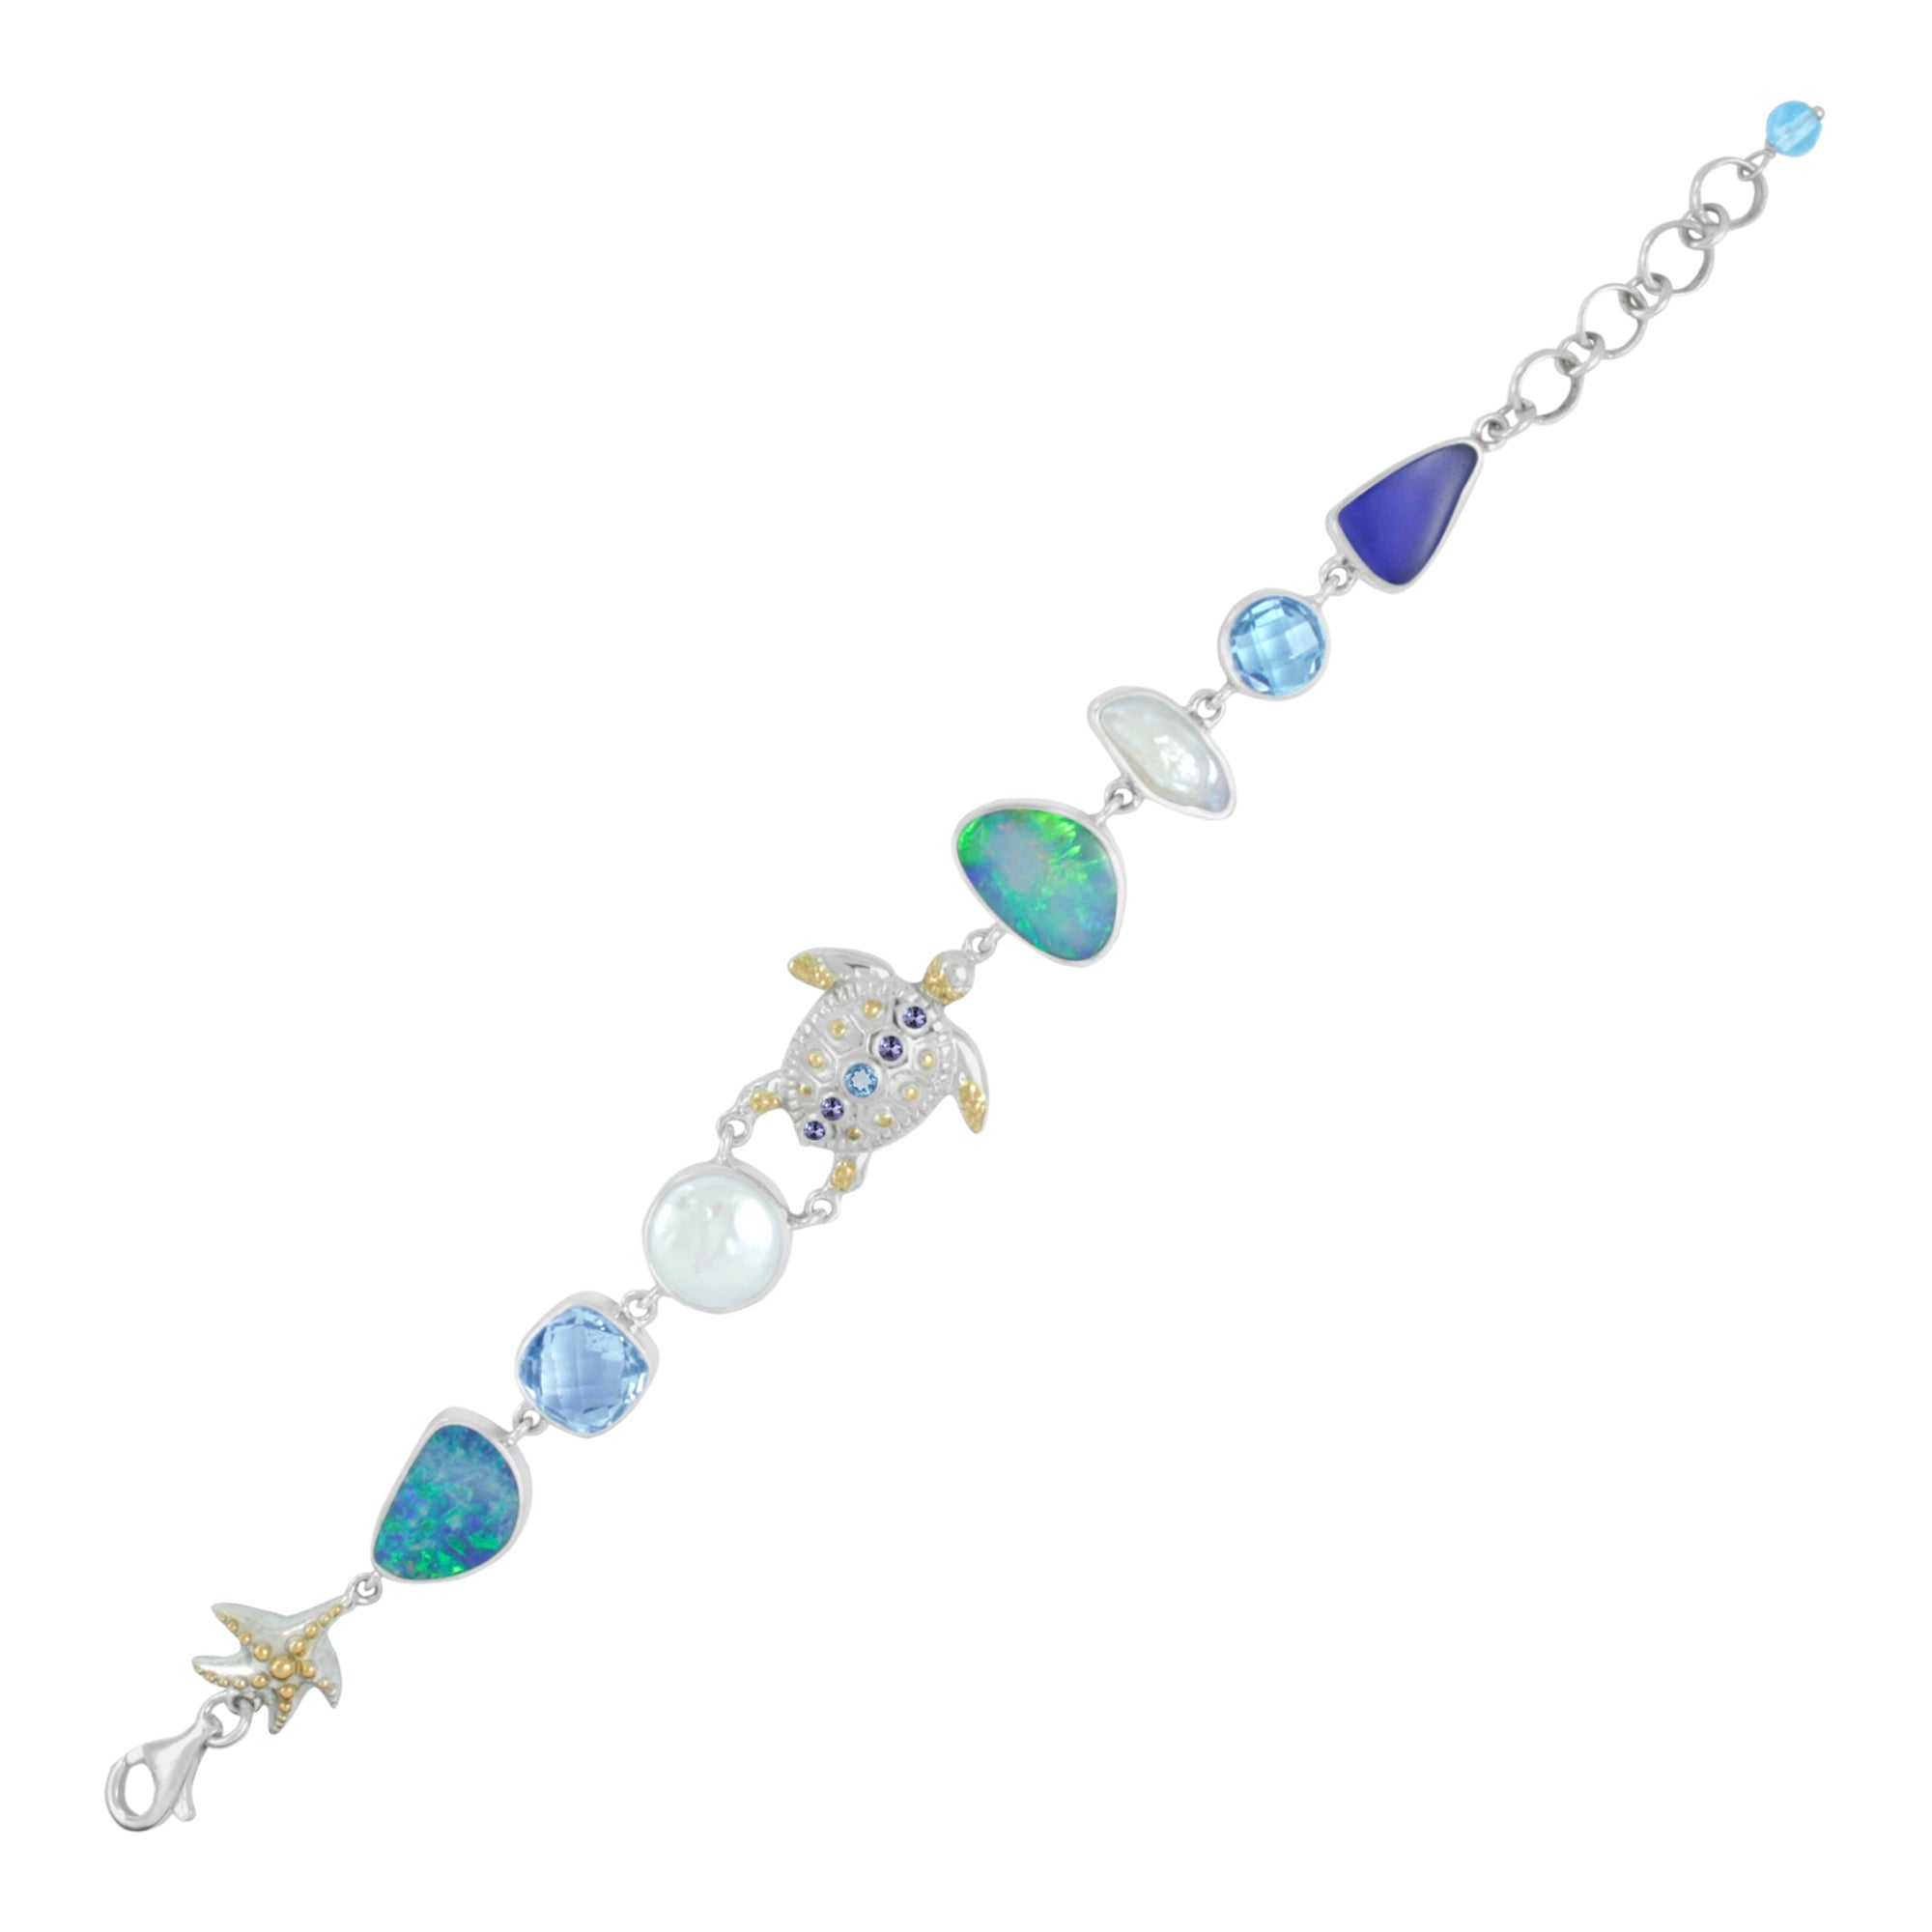 Exquisite Sea Life Bracelet featuring Sea Glass,Turtles, Opal and Gemstones.